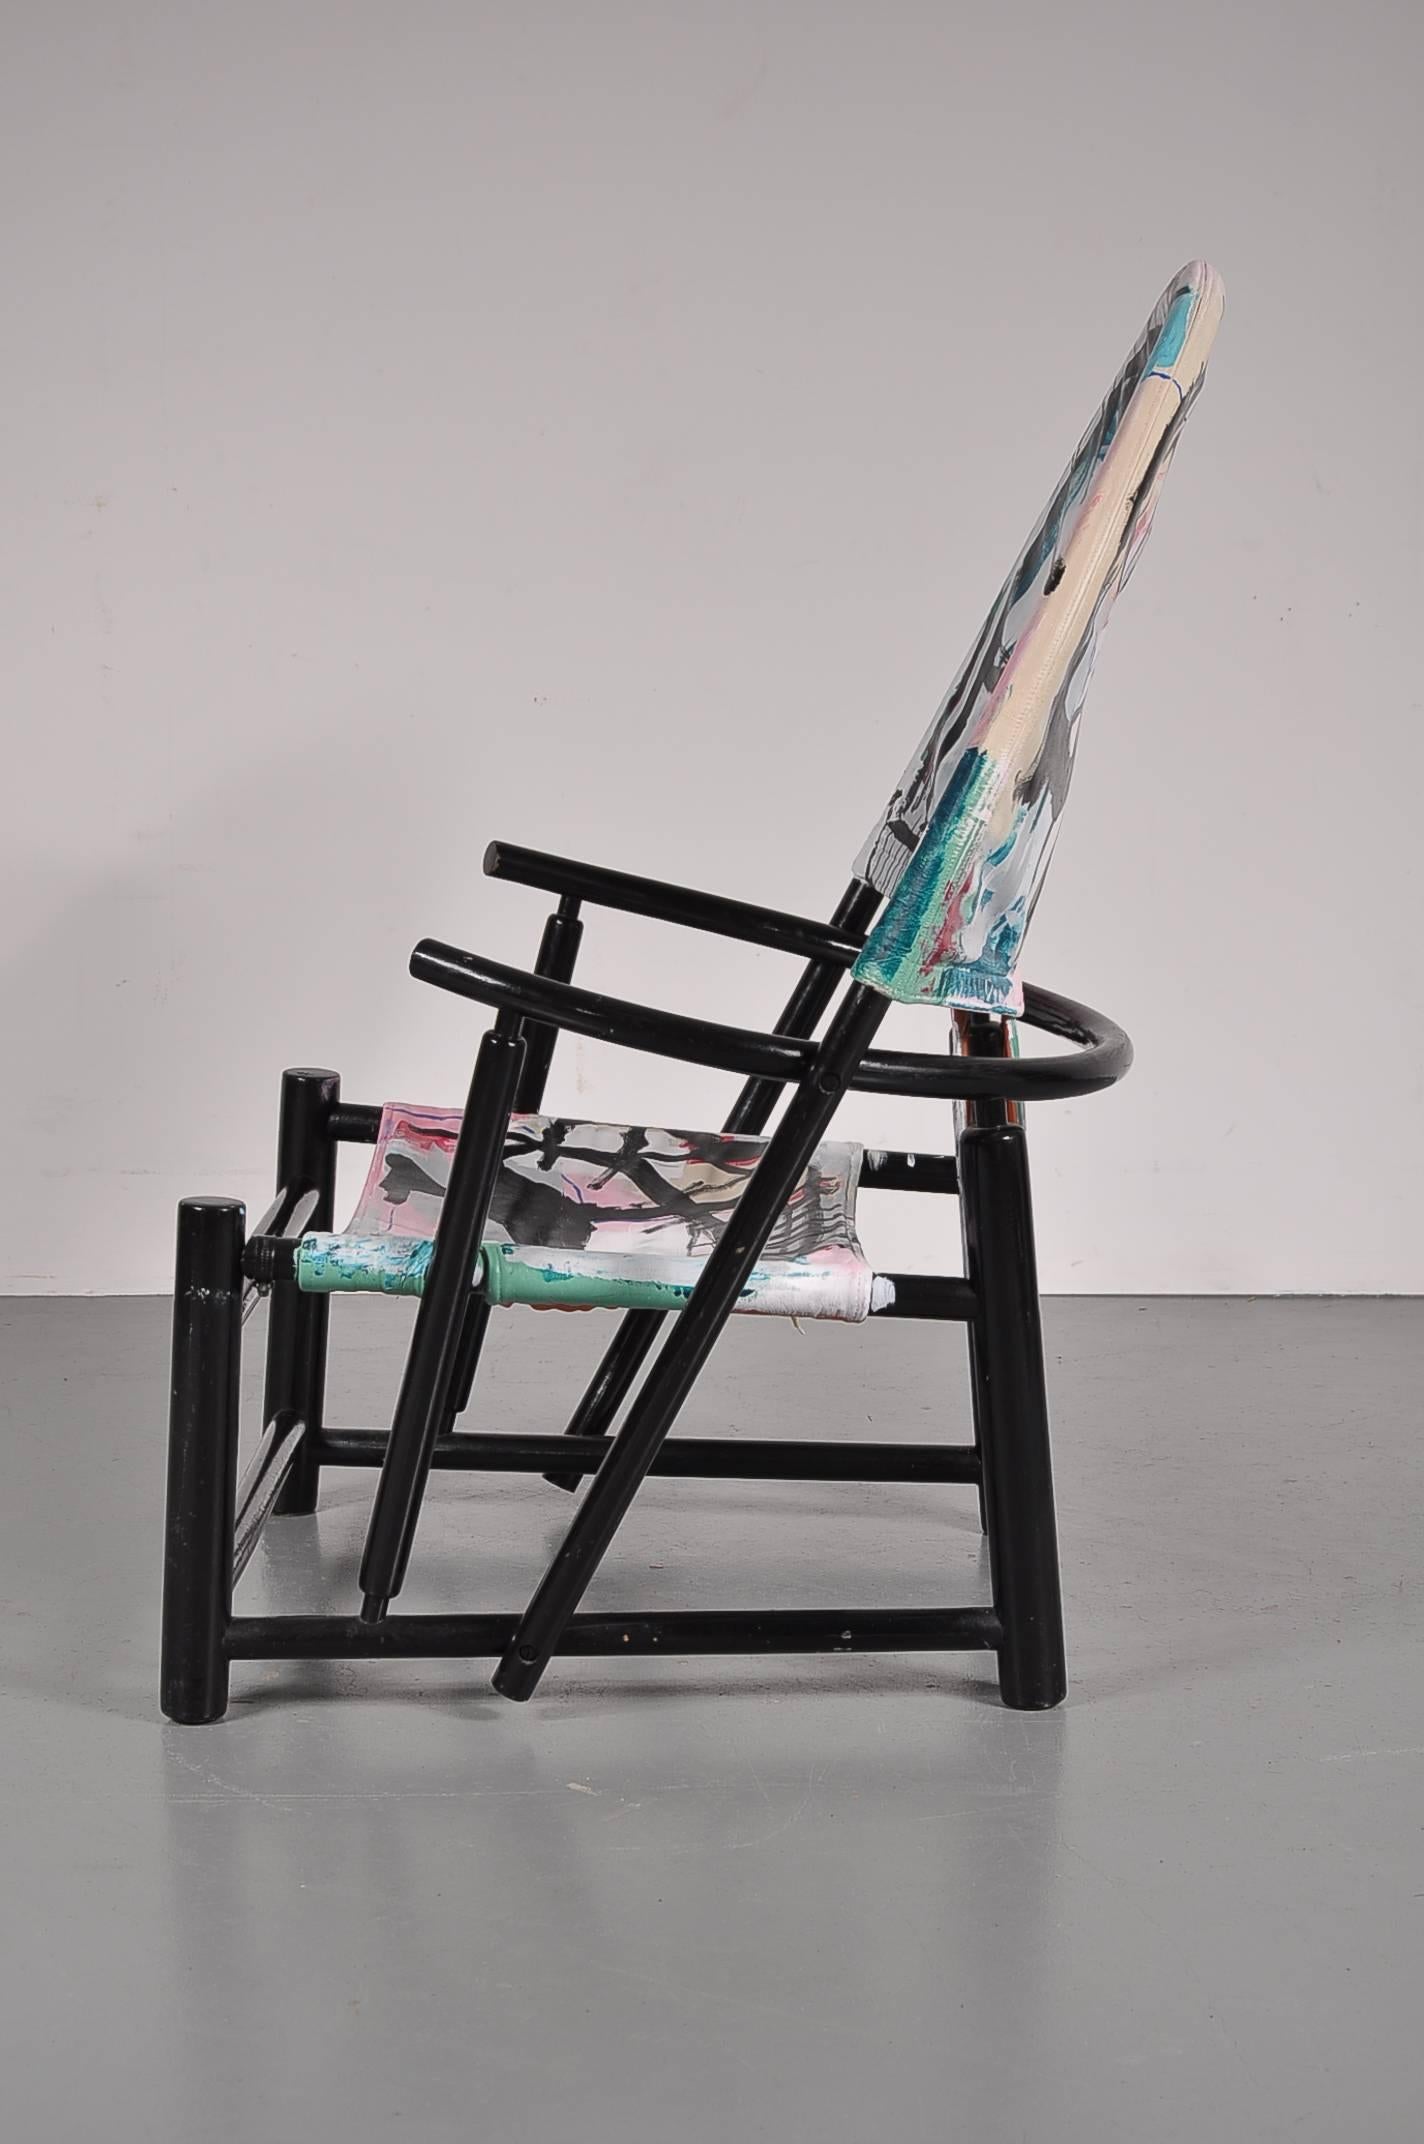 A unique version of the Hoop chair, created as collaboration between seller and Dutch artist Narouz Moltzer in the Netherlands.

This one of a kind chair has been selected by seller because of it's beautiful design. It is the Hoop chair by Piero